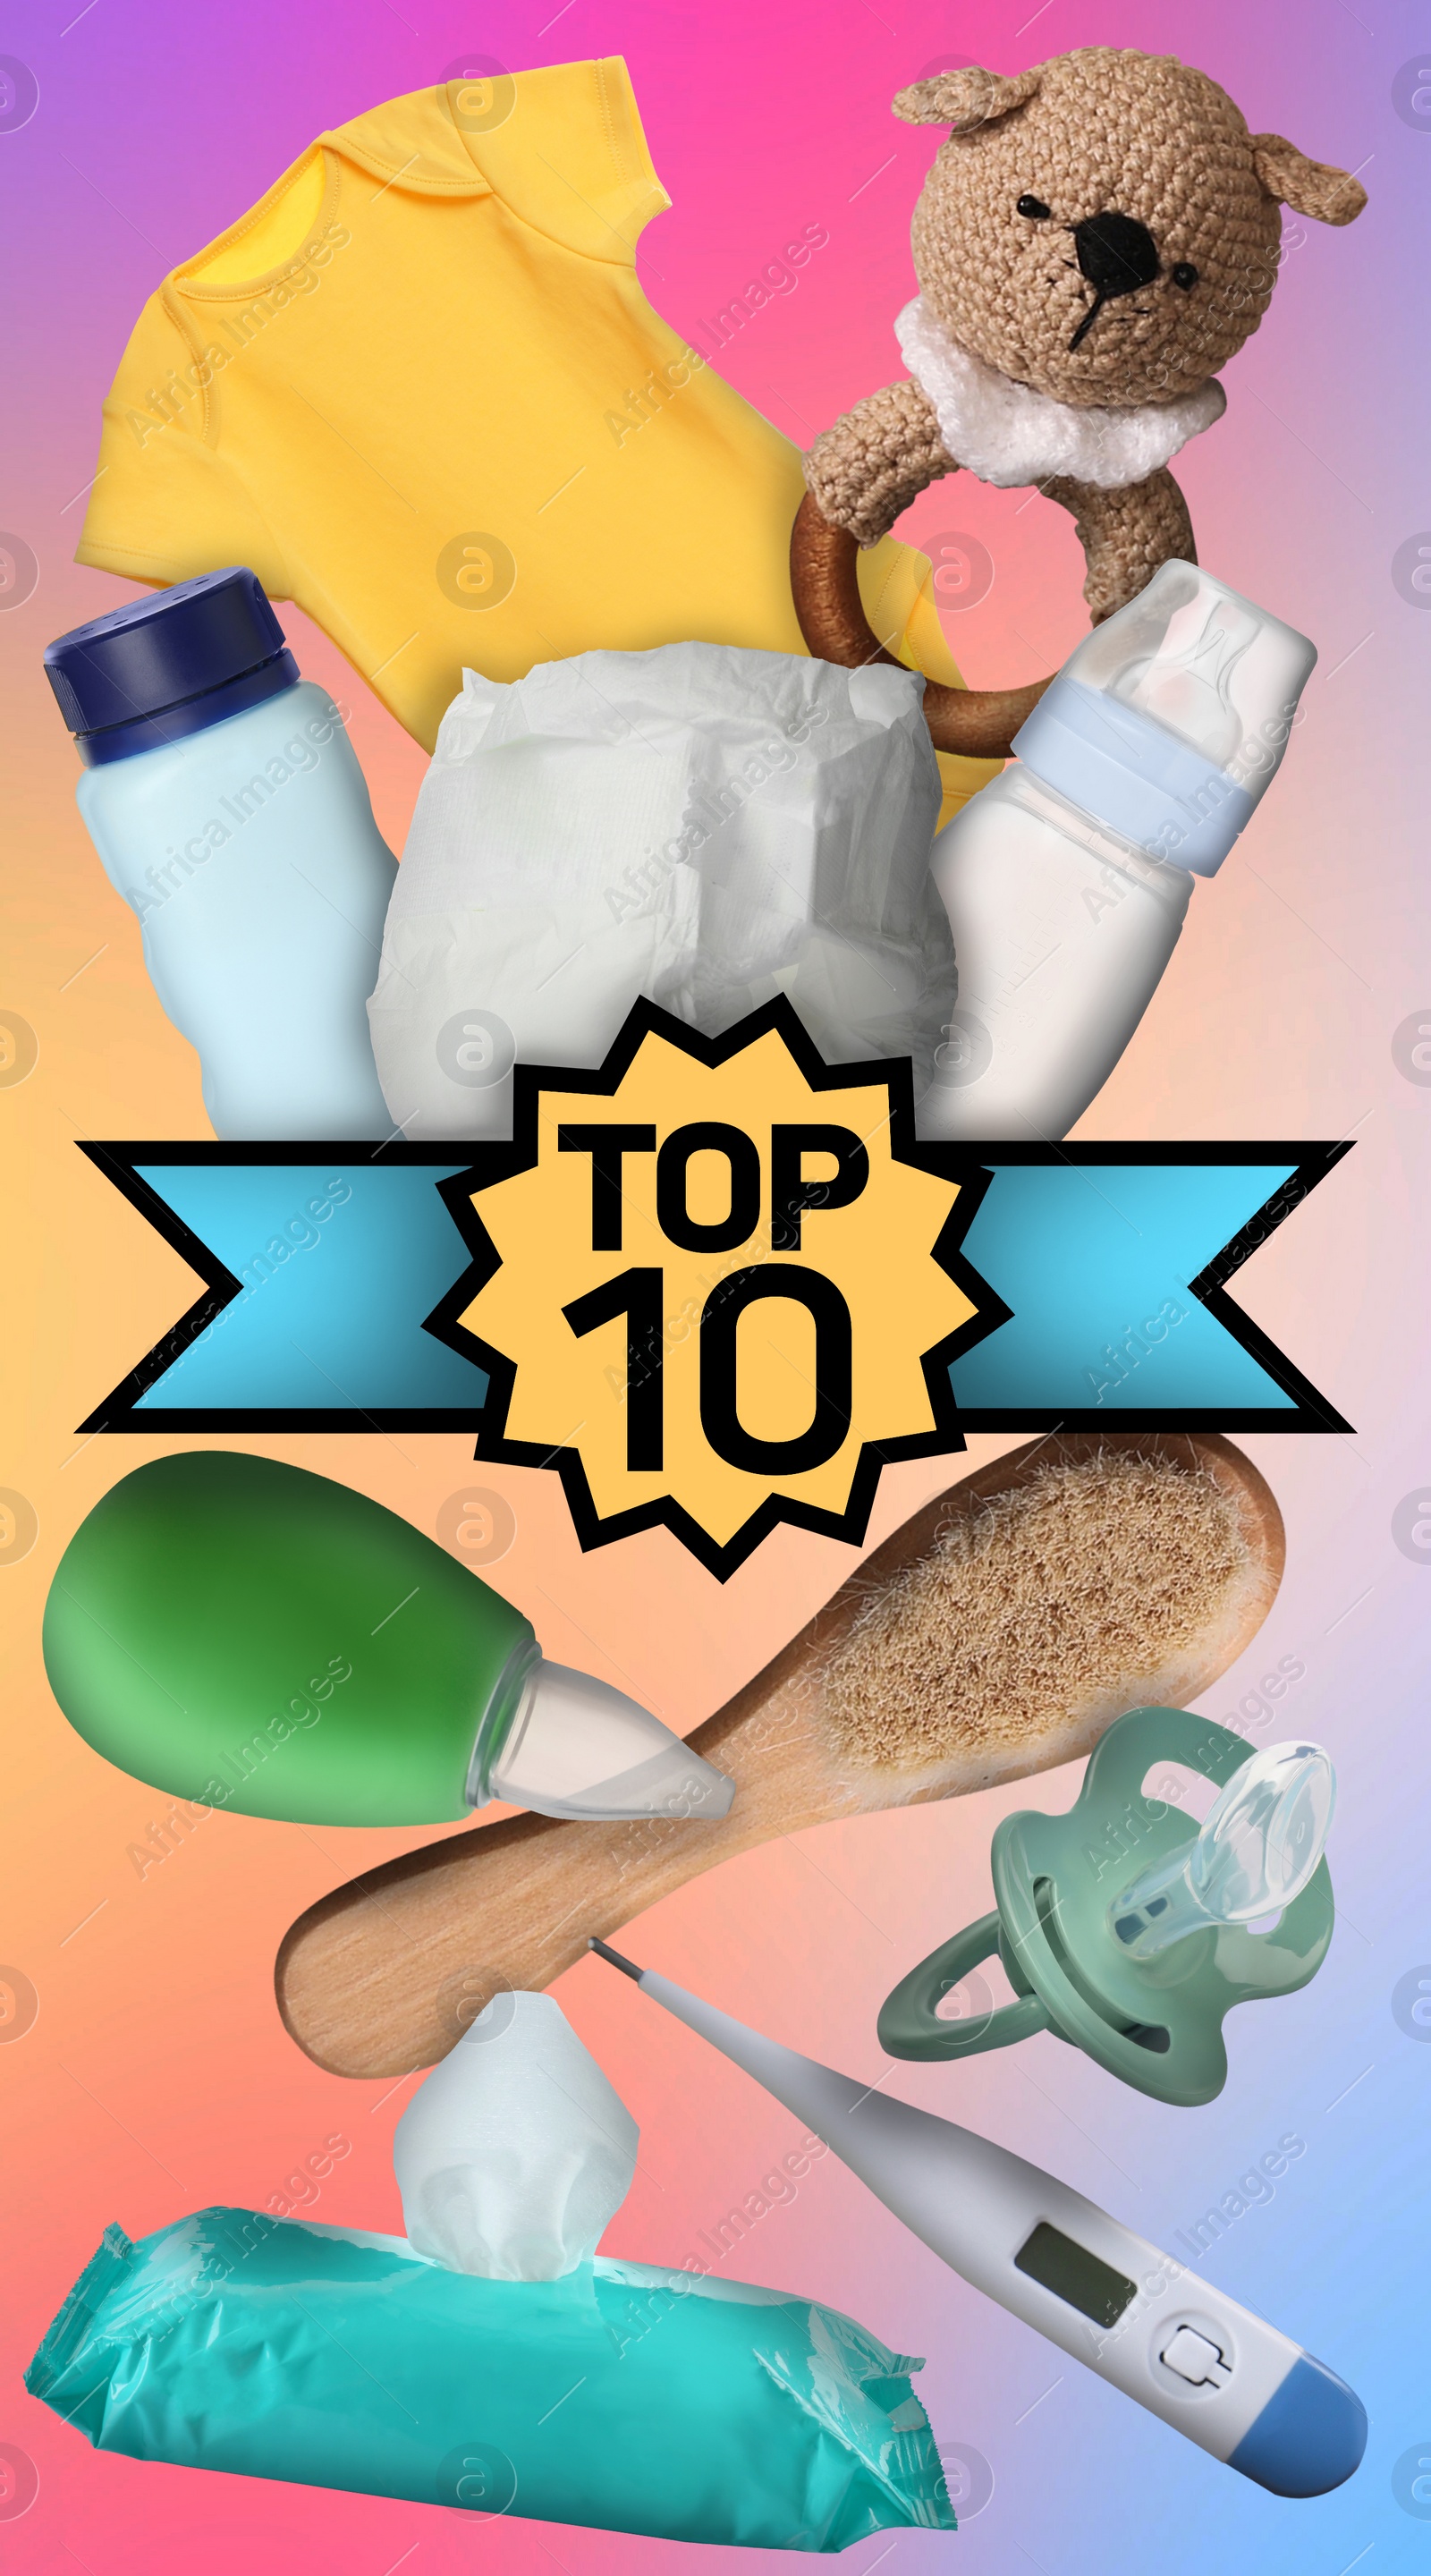 Image of Top ten list of baby care products on colorful gradient background